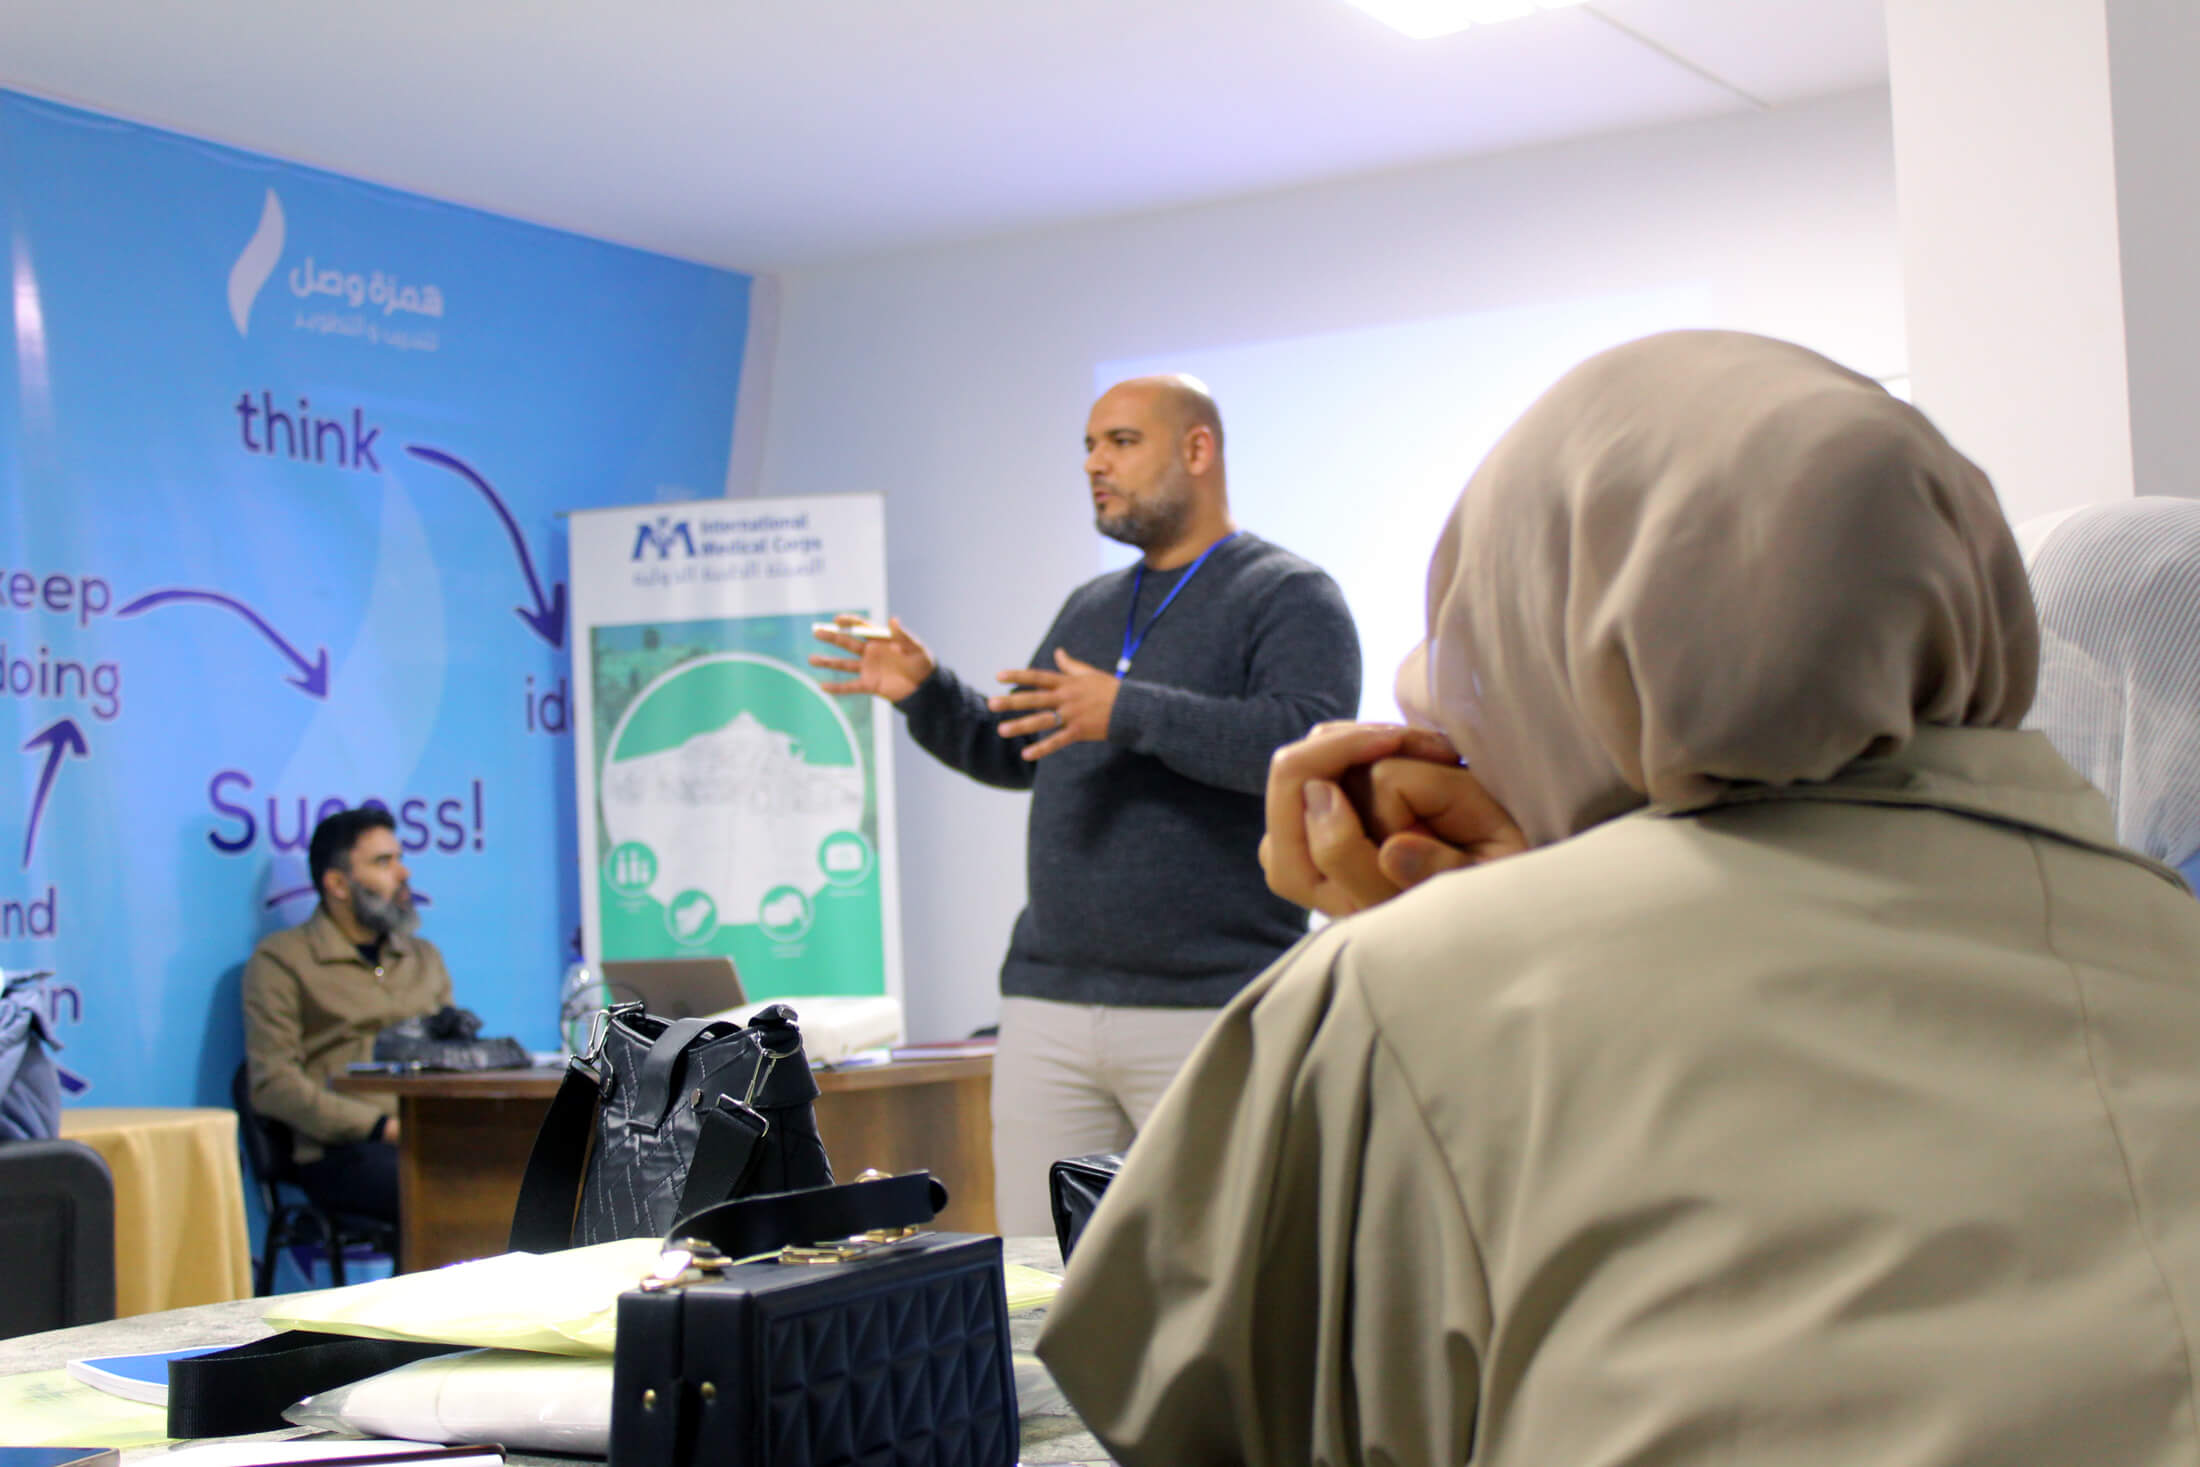 Dr. Ahmed Shafter conducts a training session.